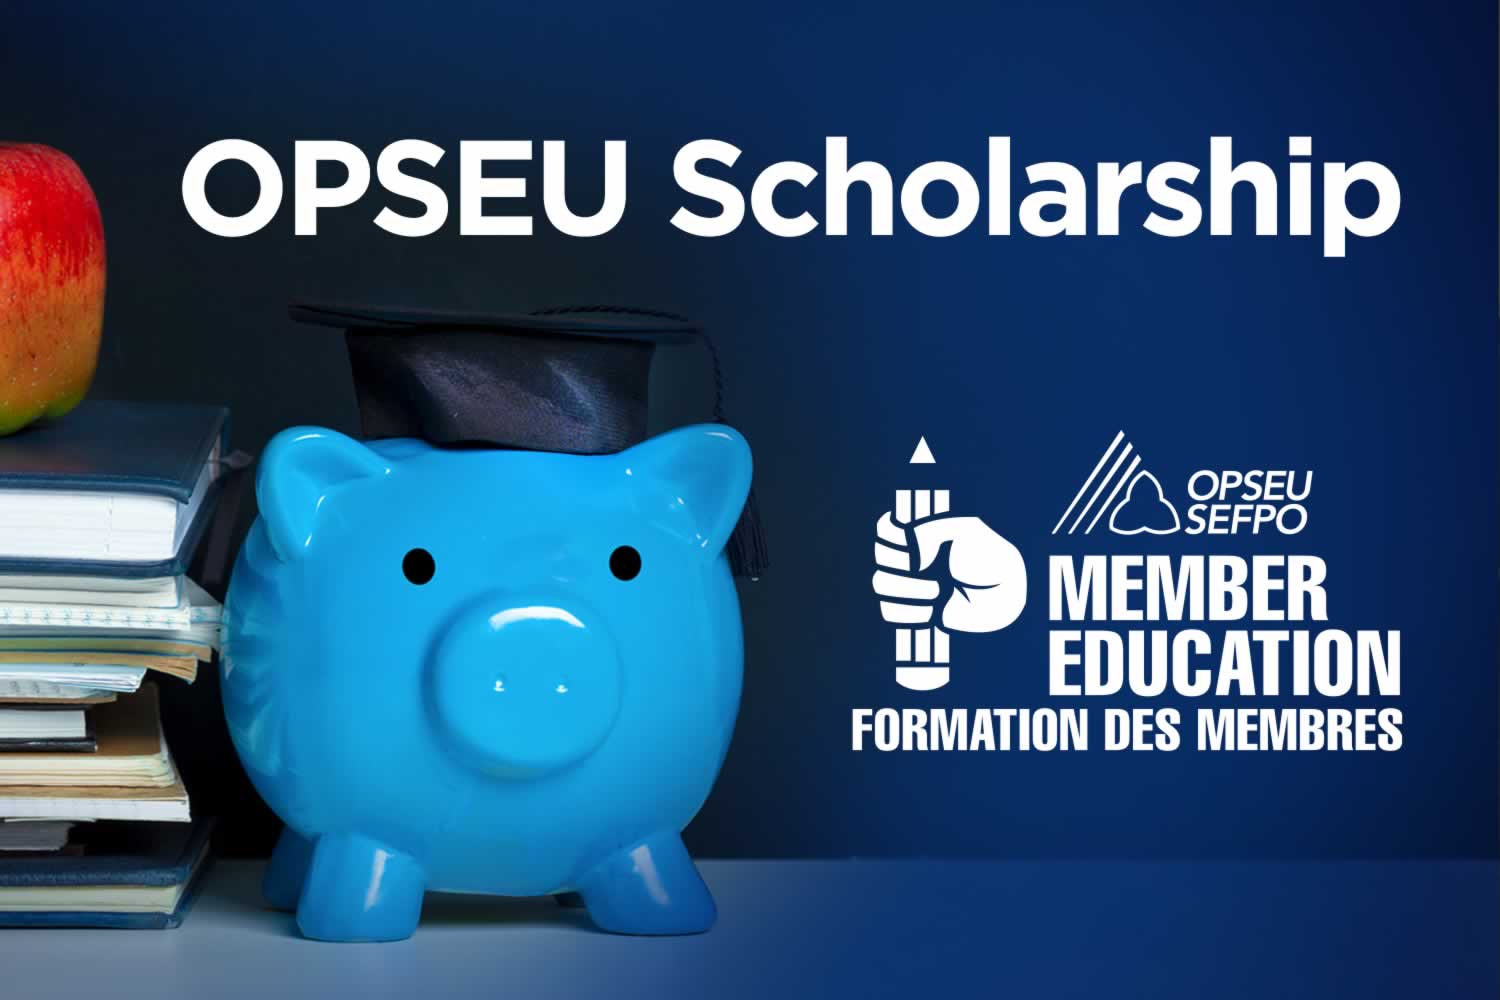 OPSEU Scholarship. Member Education. Image of books, an apple and a piggy bank wearing a grad cap